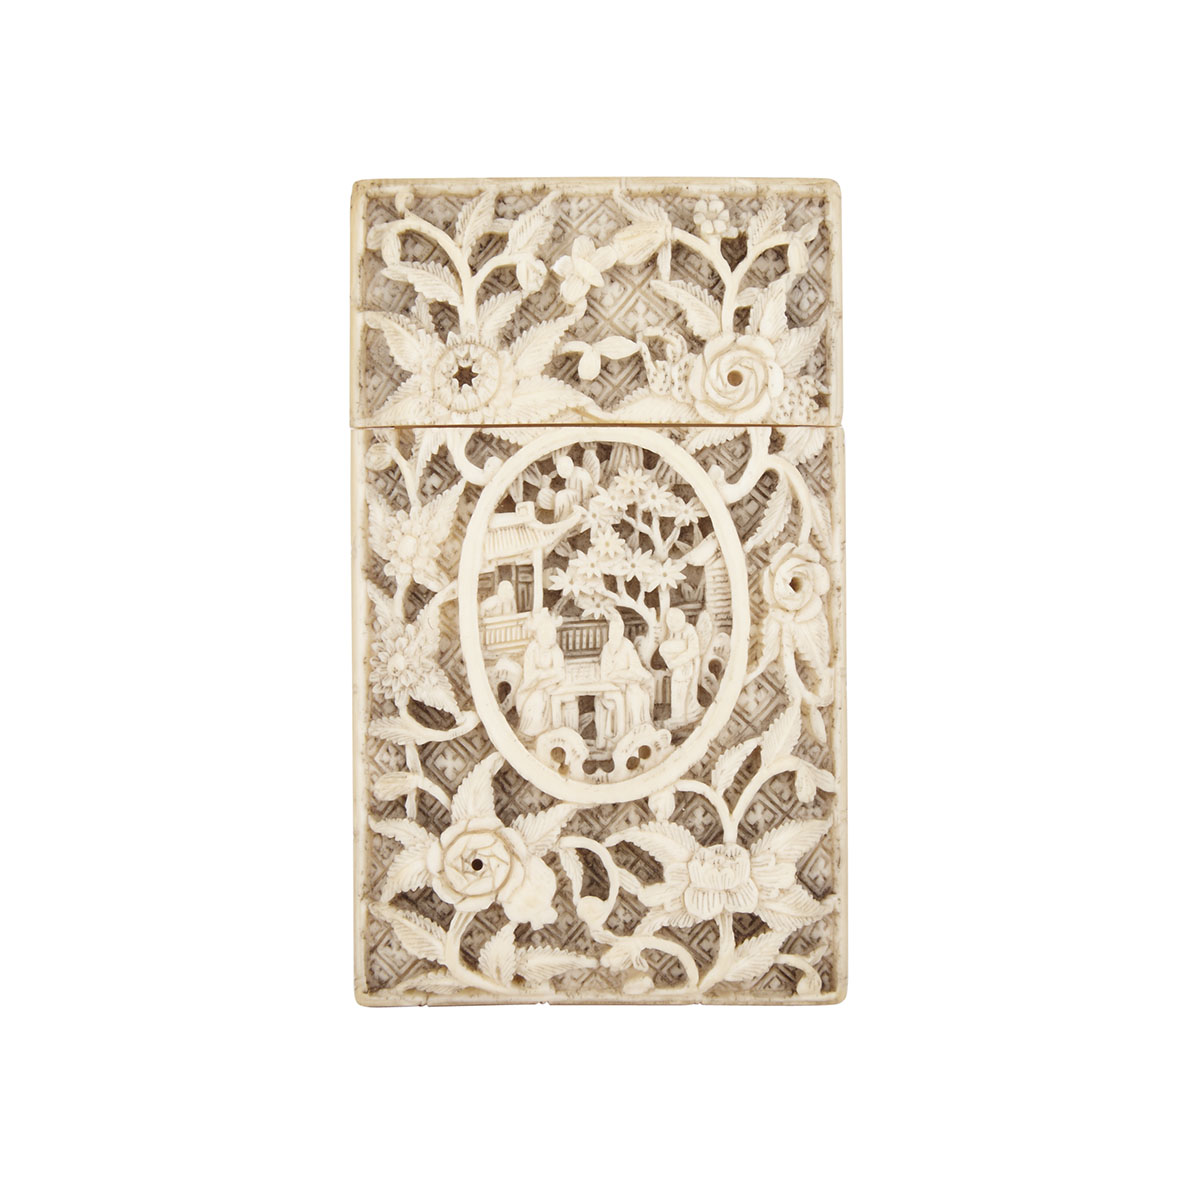 Carved Ivory Card Case, Early 20th Century